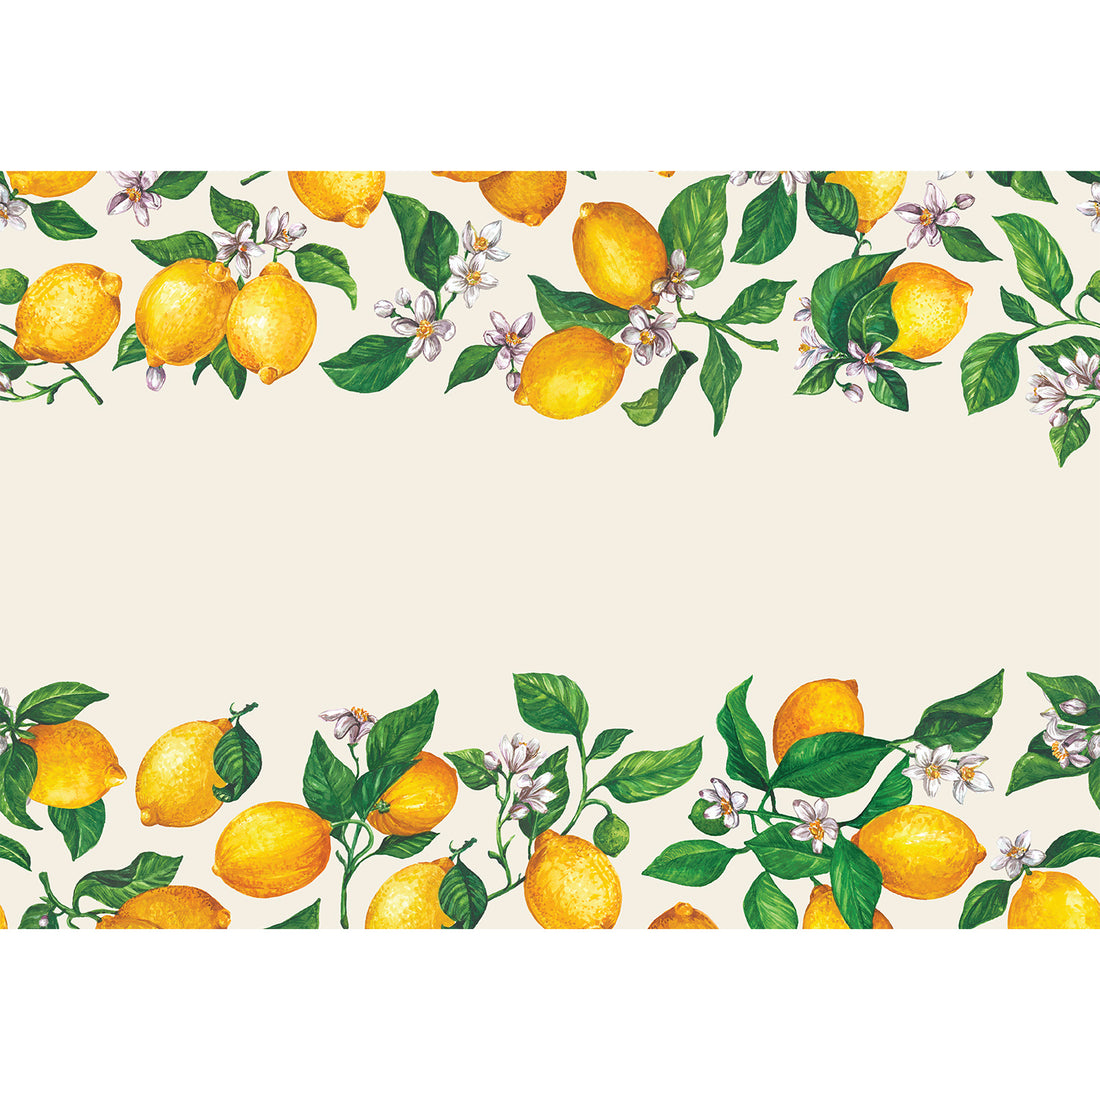 A paper runner with edges lines with vibrant illustrated yellow lemons, green leaves and white blooms, with the white background left blank through the middle for a personal messgae.